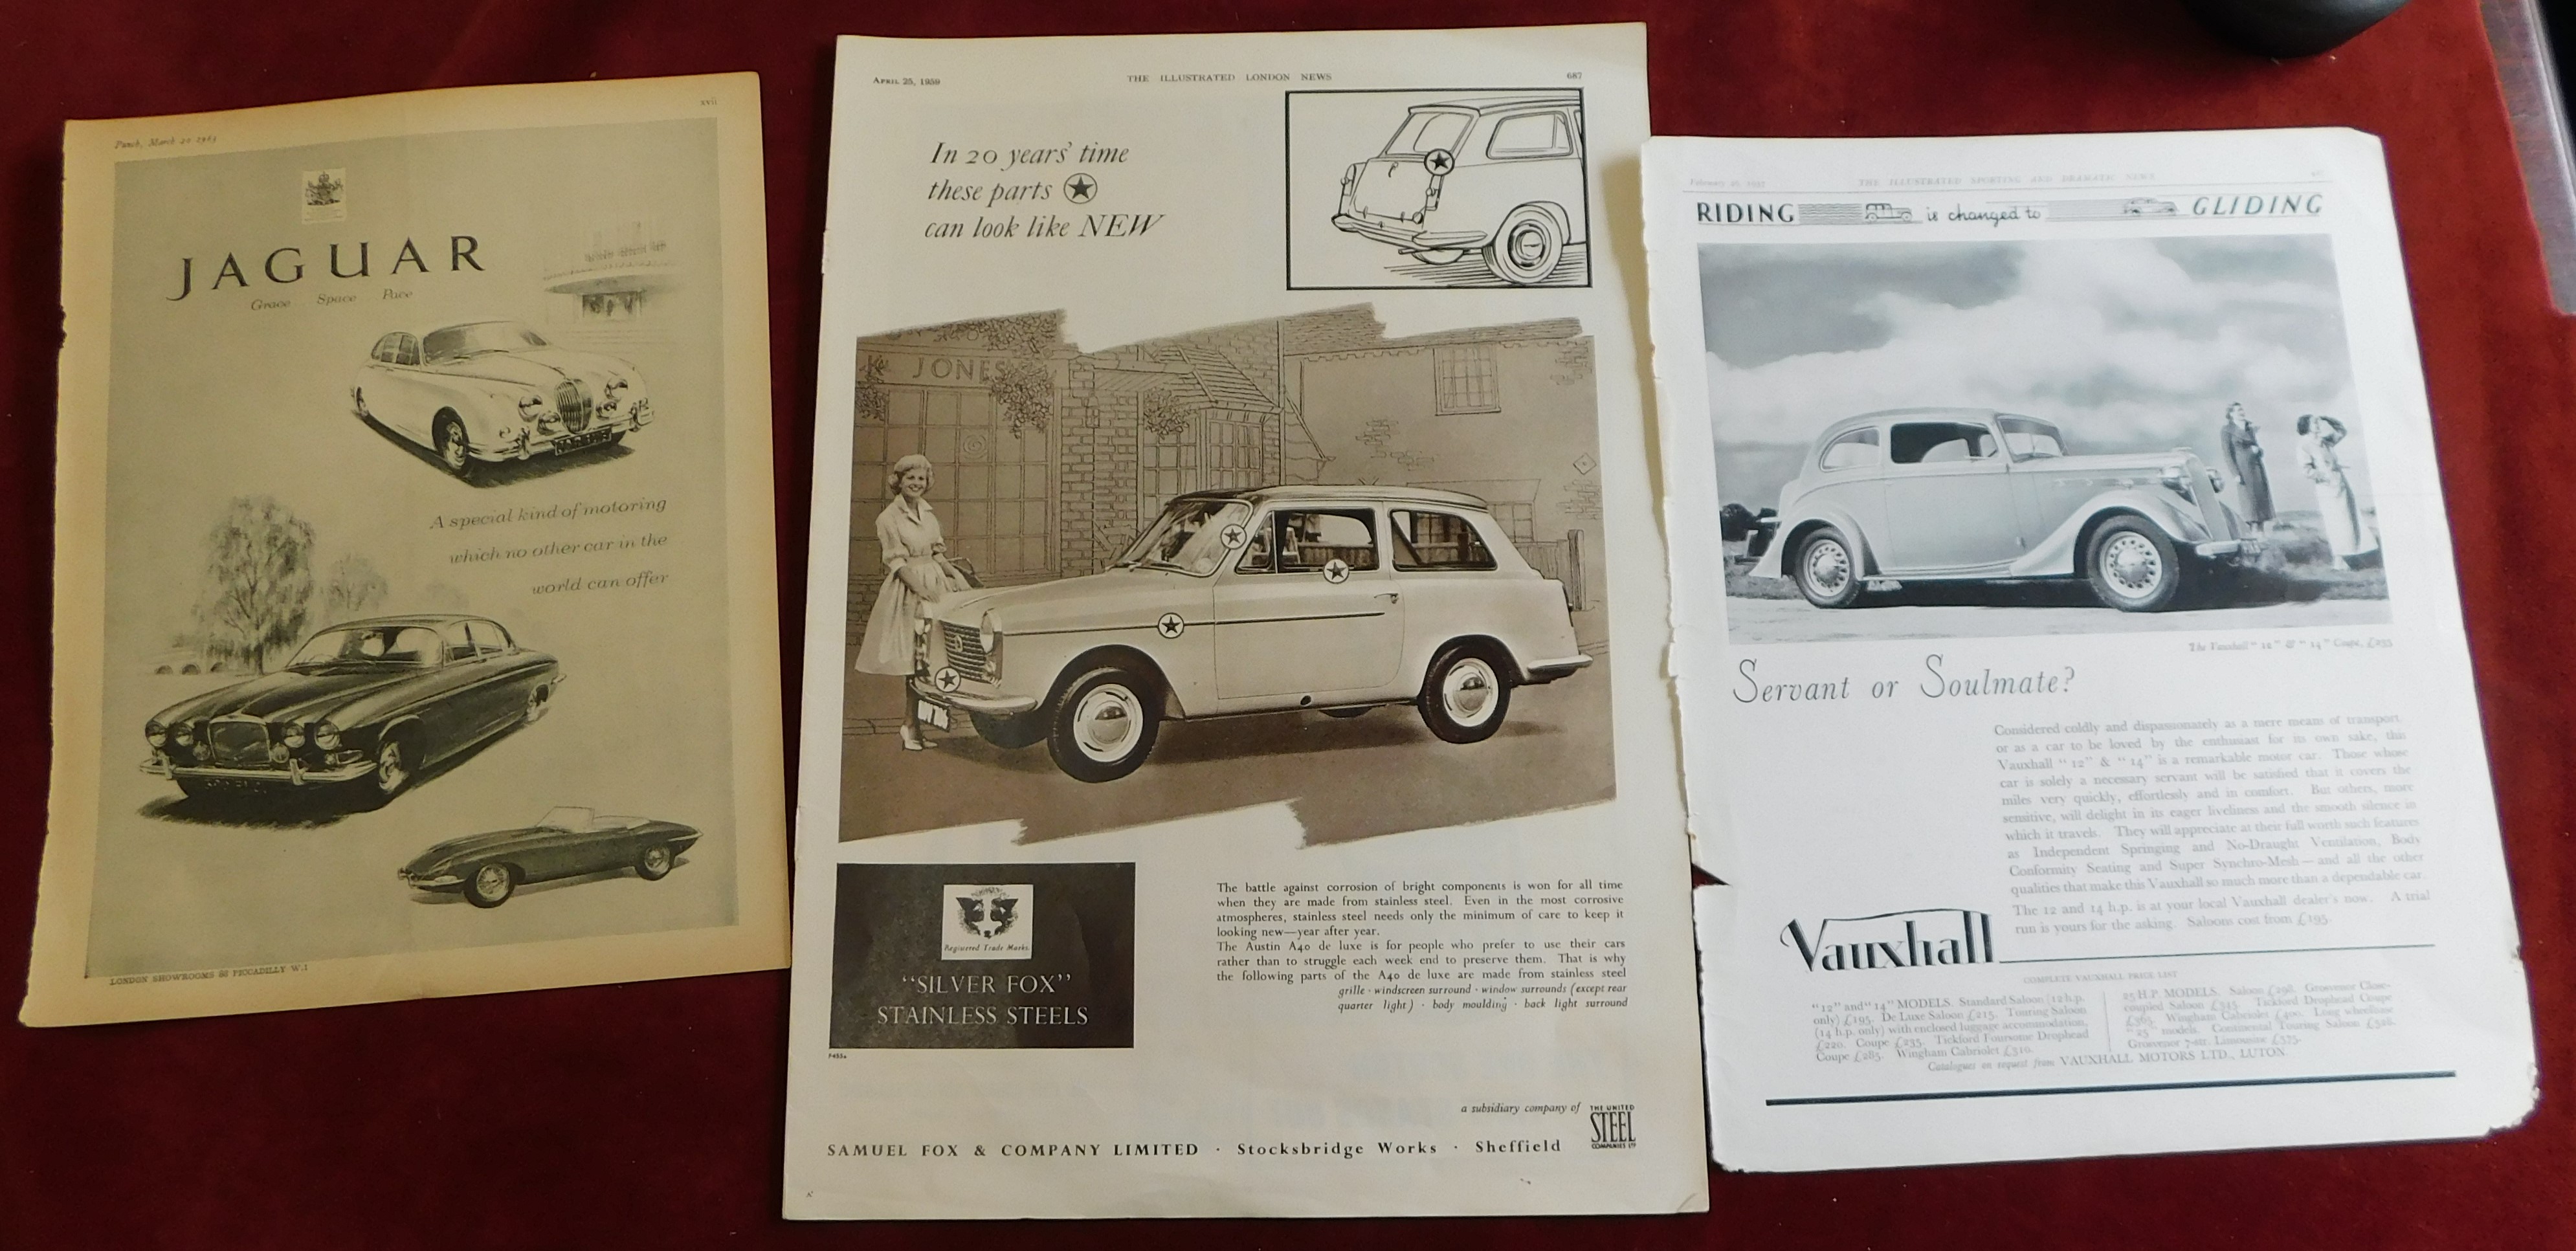 Advertising Prints (3) Vauxhall '12' and '14' Coup £235 Feb 26th 1937, Riding is changed to